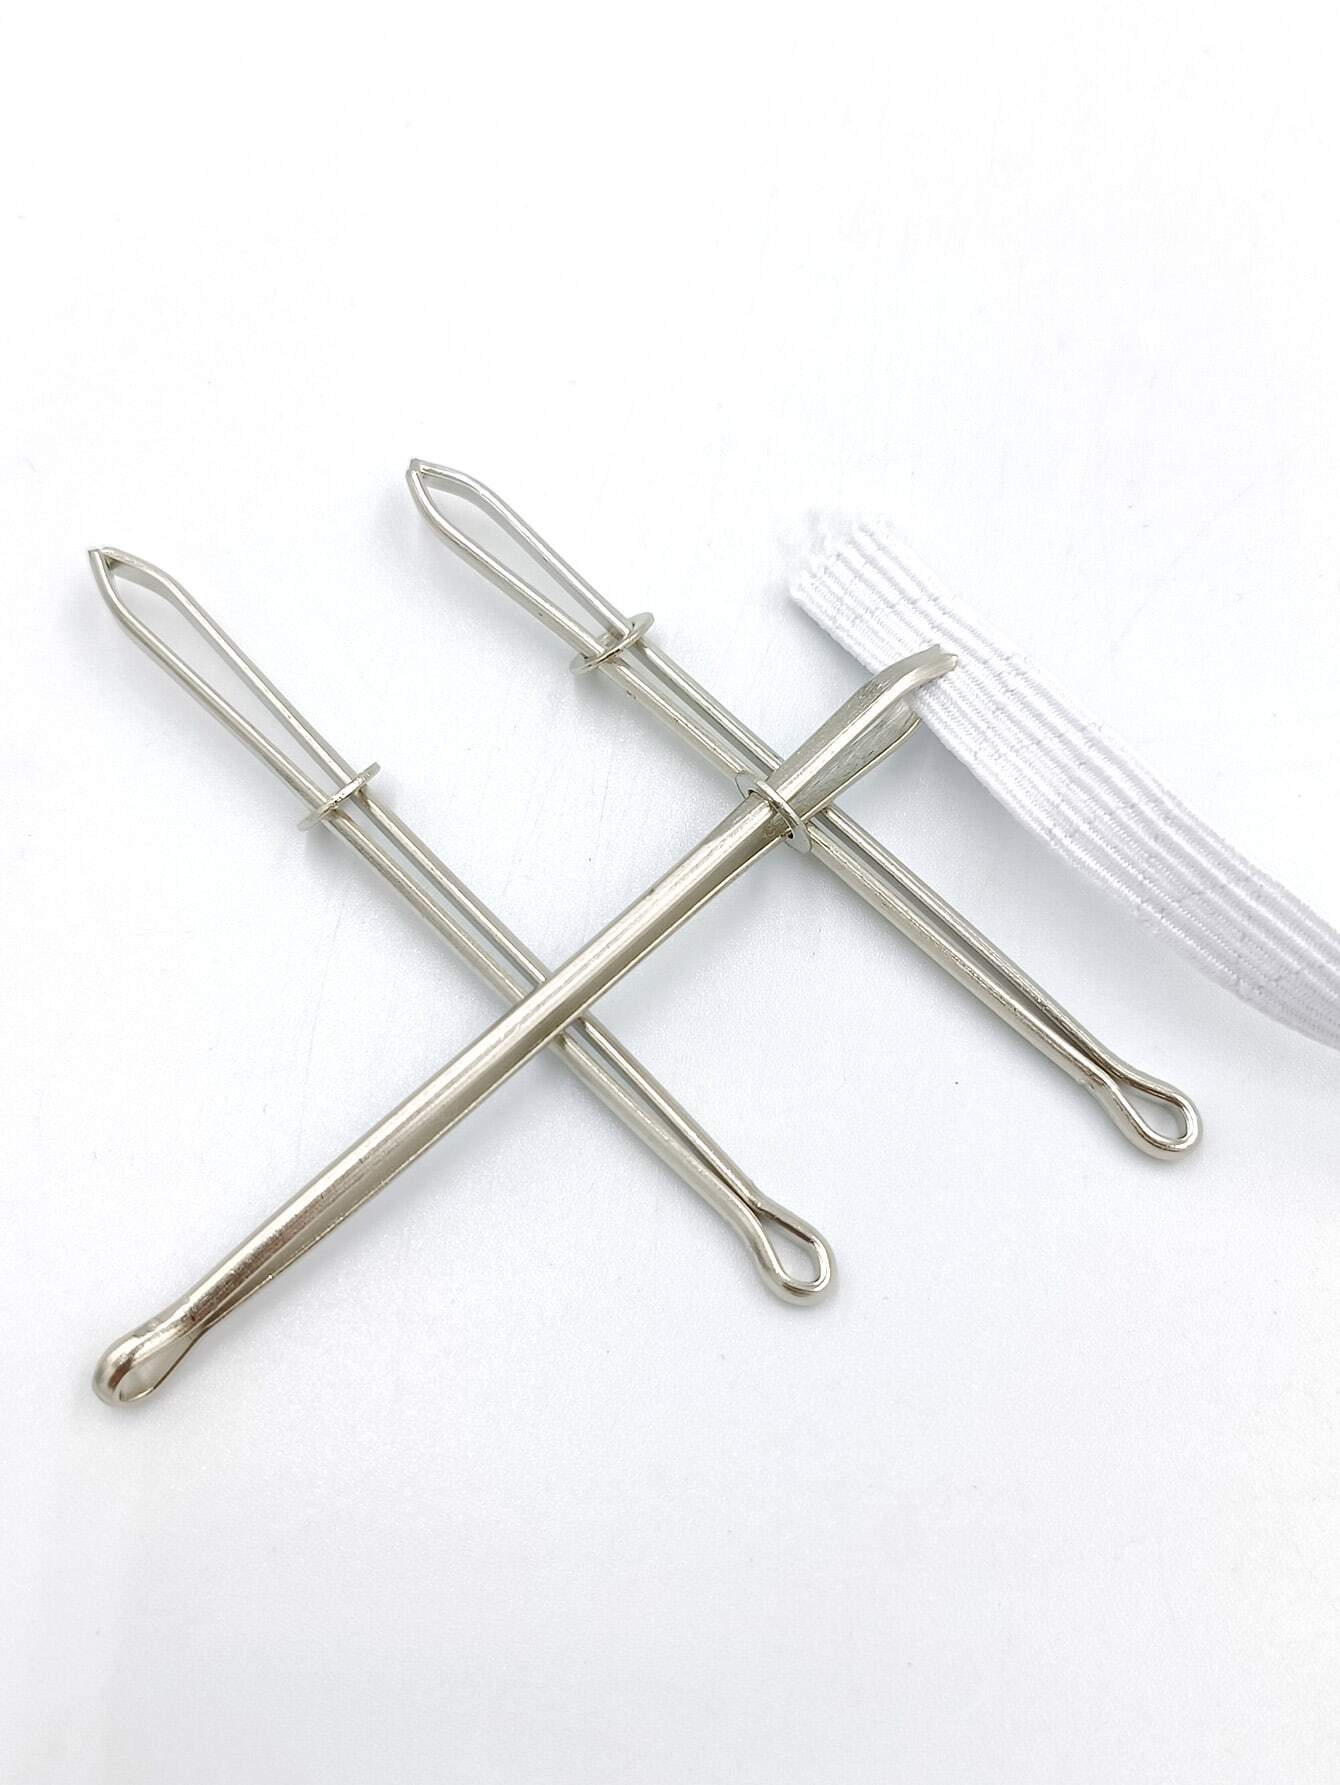 3pcs Stainless Steel Elastic Cord Rope Threader Clip